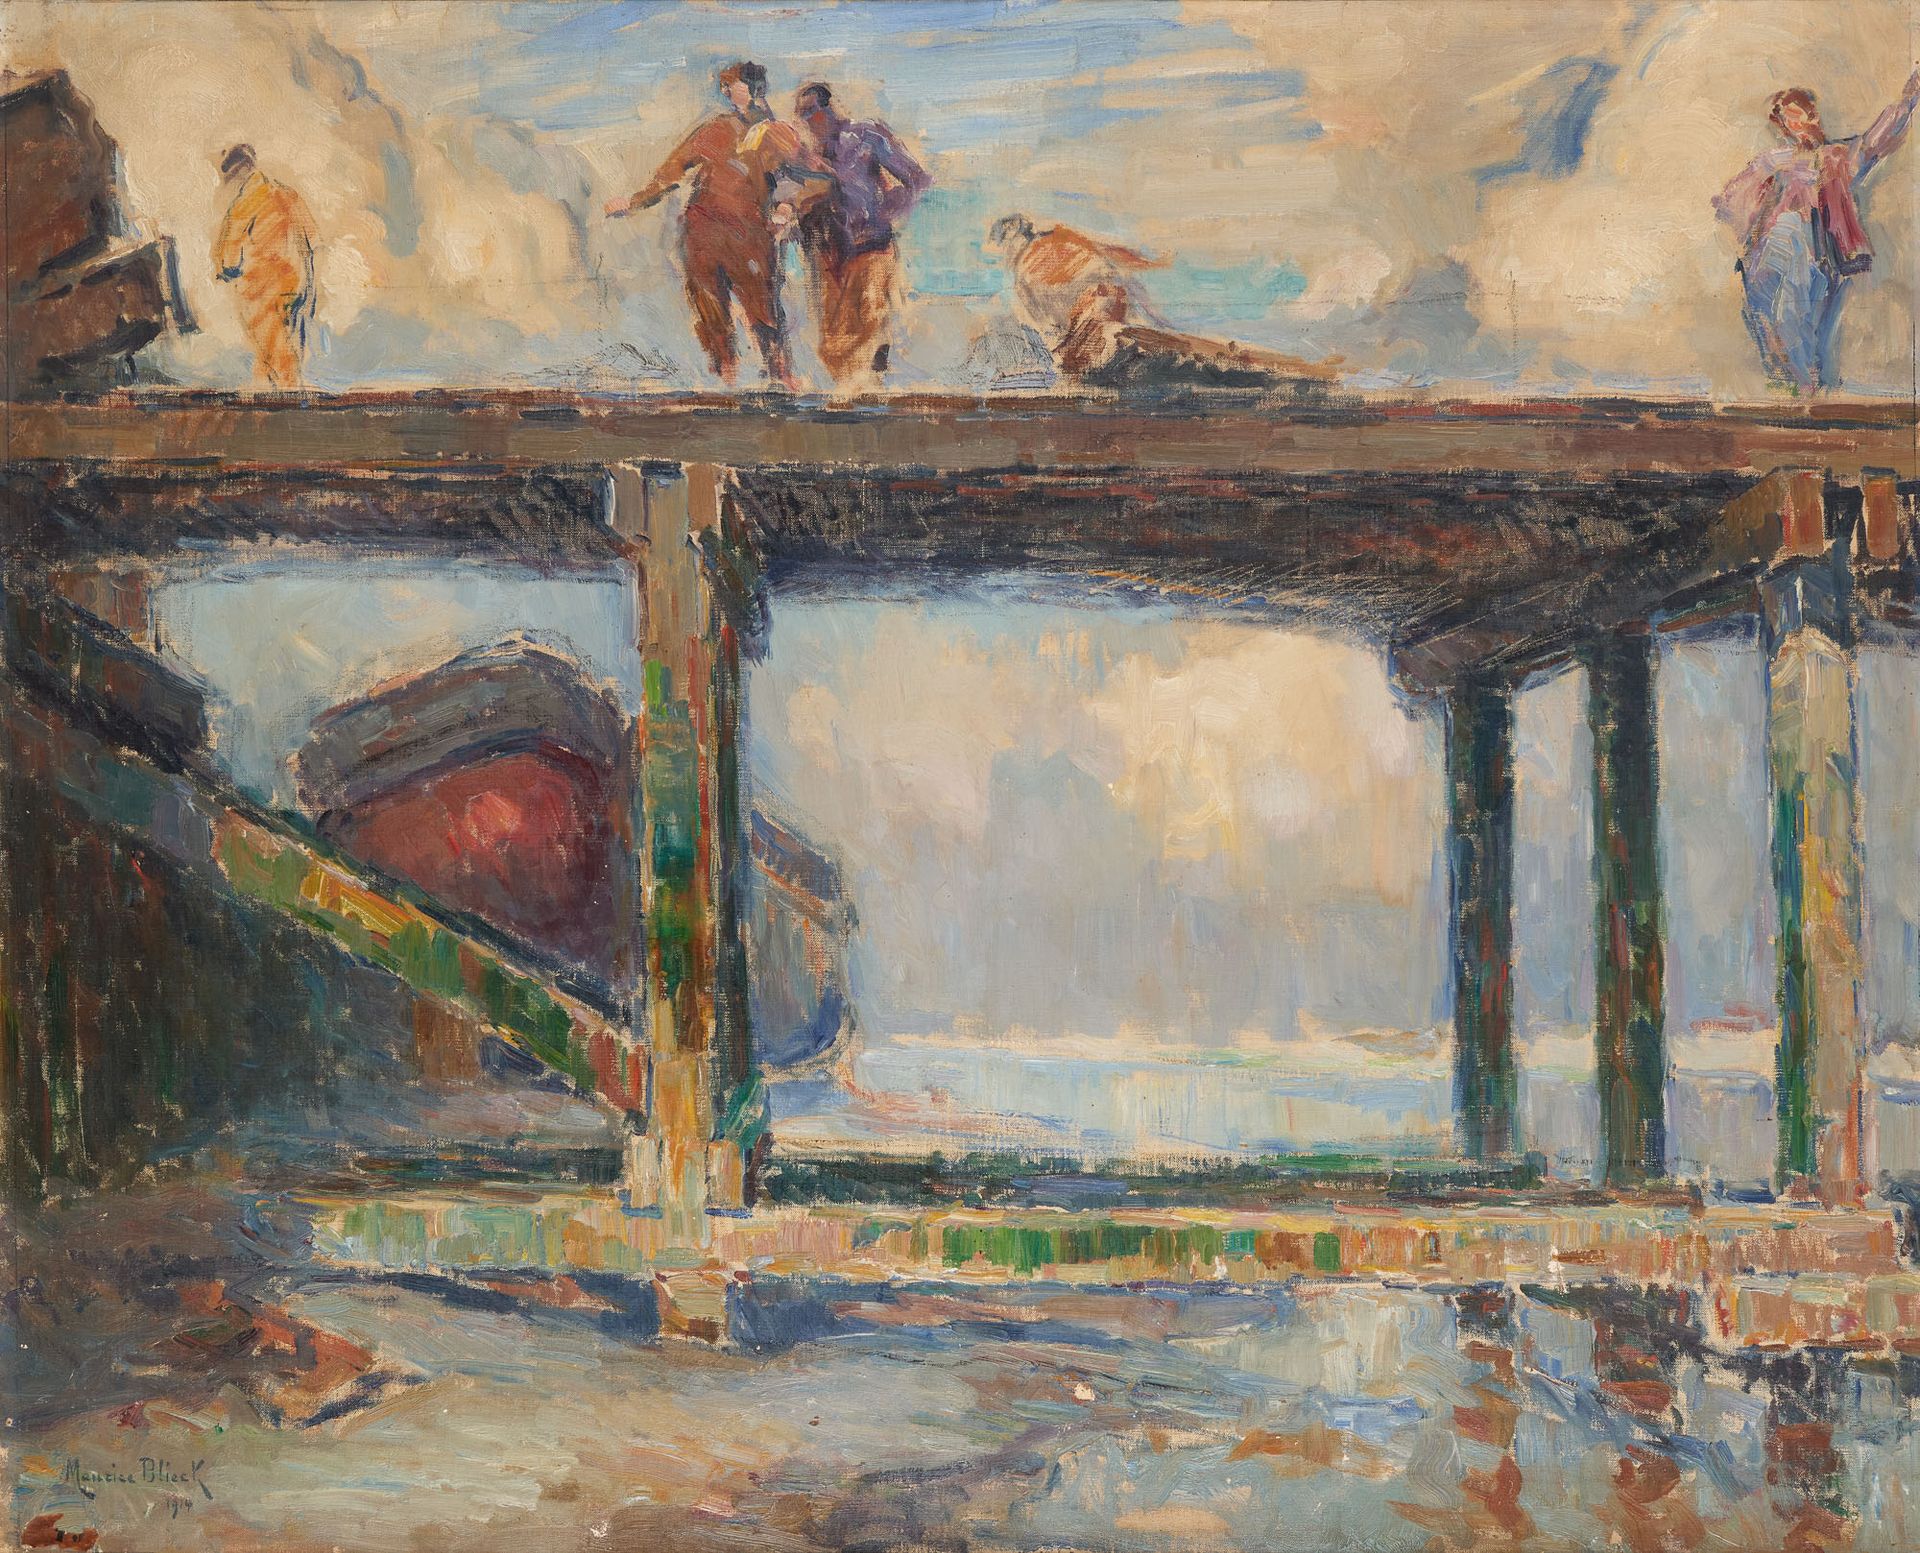 Maurice BLIECK École belge (1876-1922) Oil on canvas: The pier.

Signed and date&hellip;